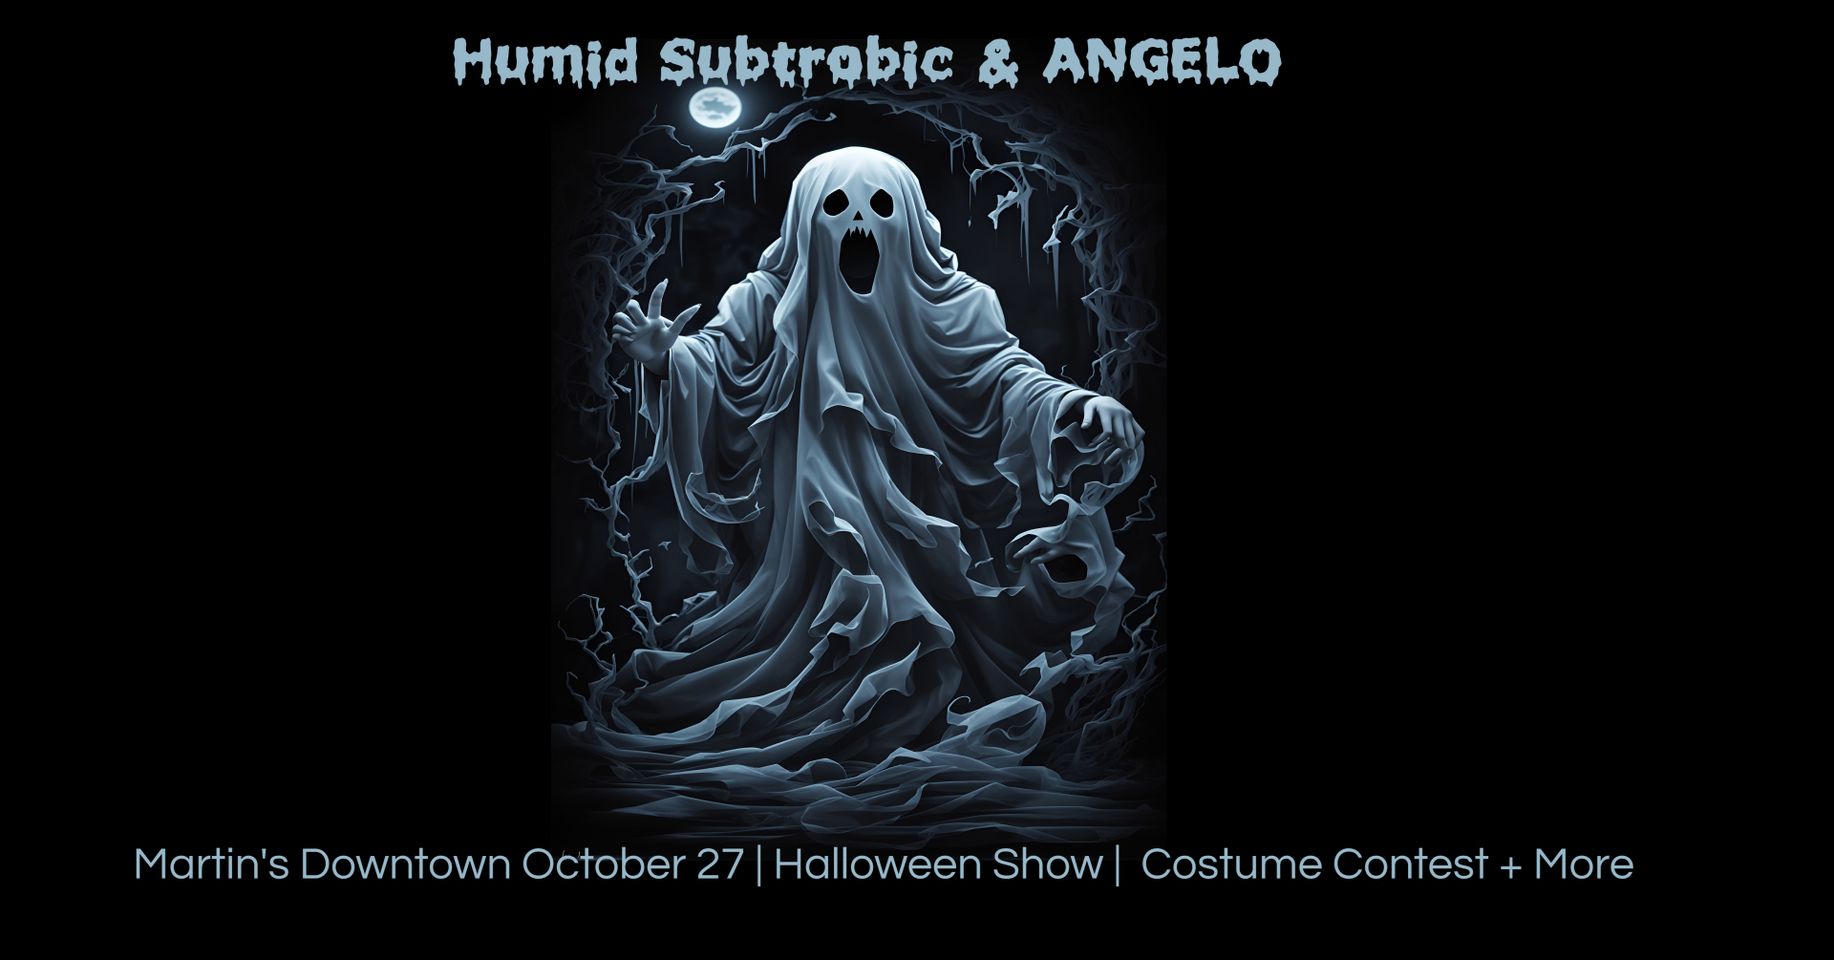 Humid Subtropic & Angelo live at Martin’s Downtown: Halloween Show